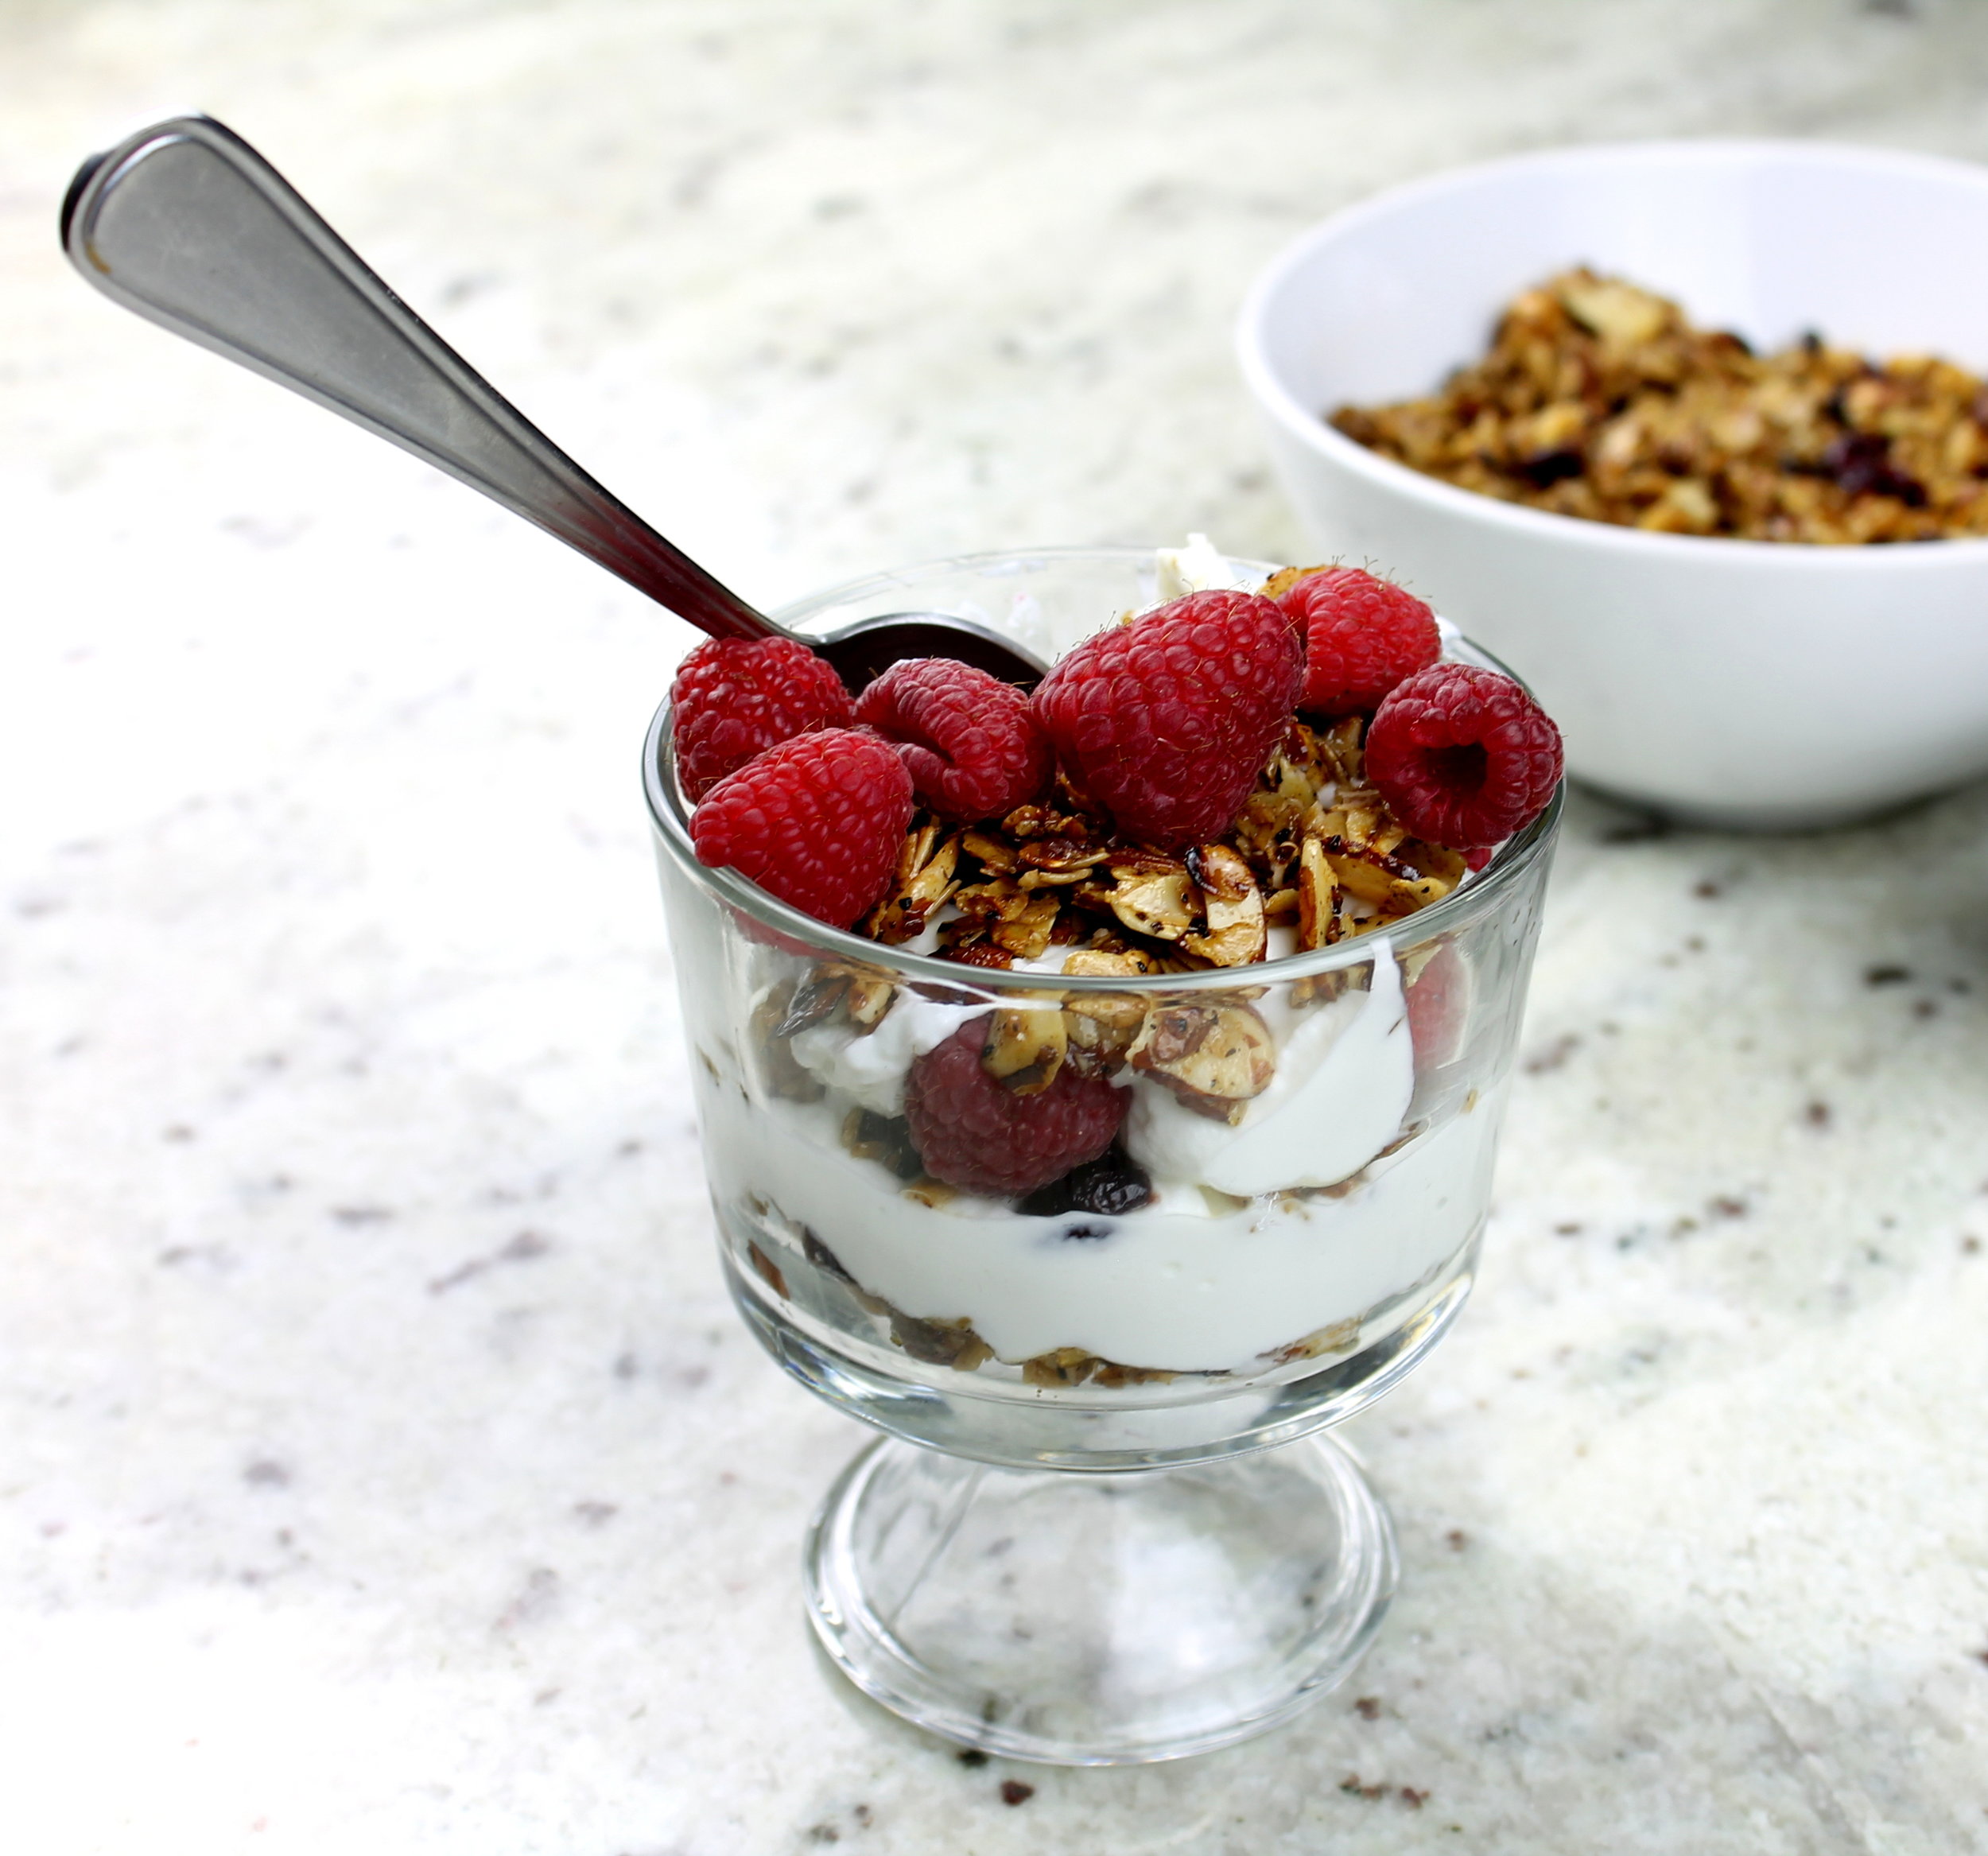 Step up your breakfast game with yogurt parfait : quick, nutritious, and easy to assemble!